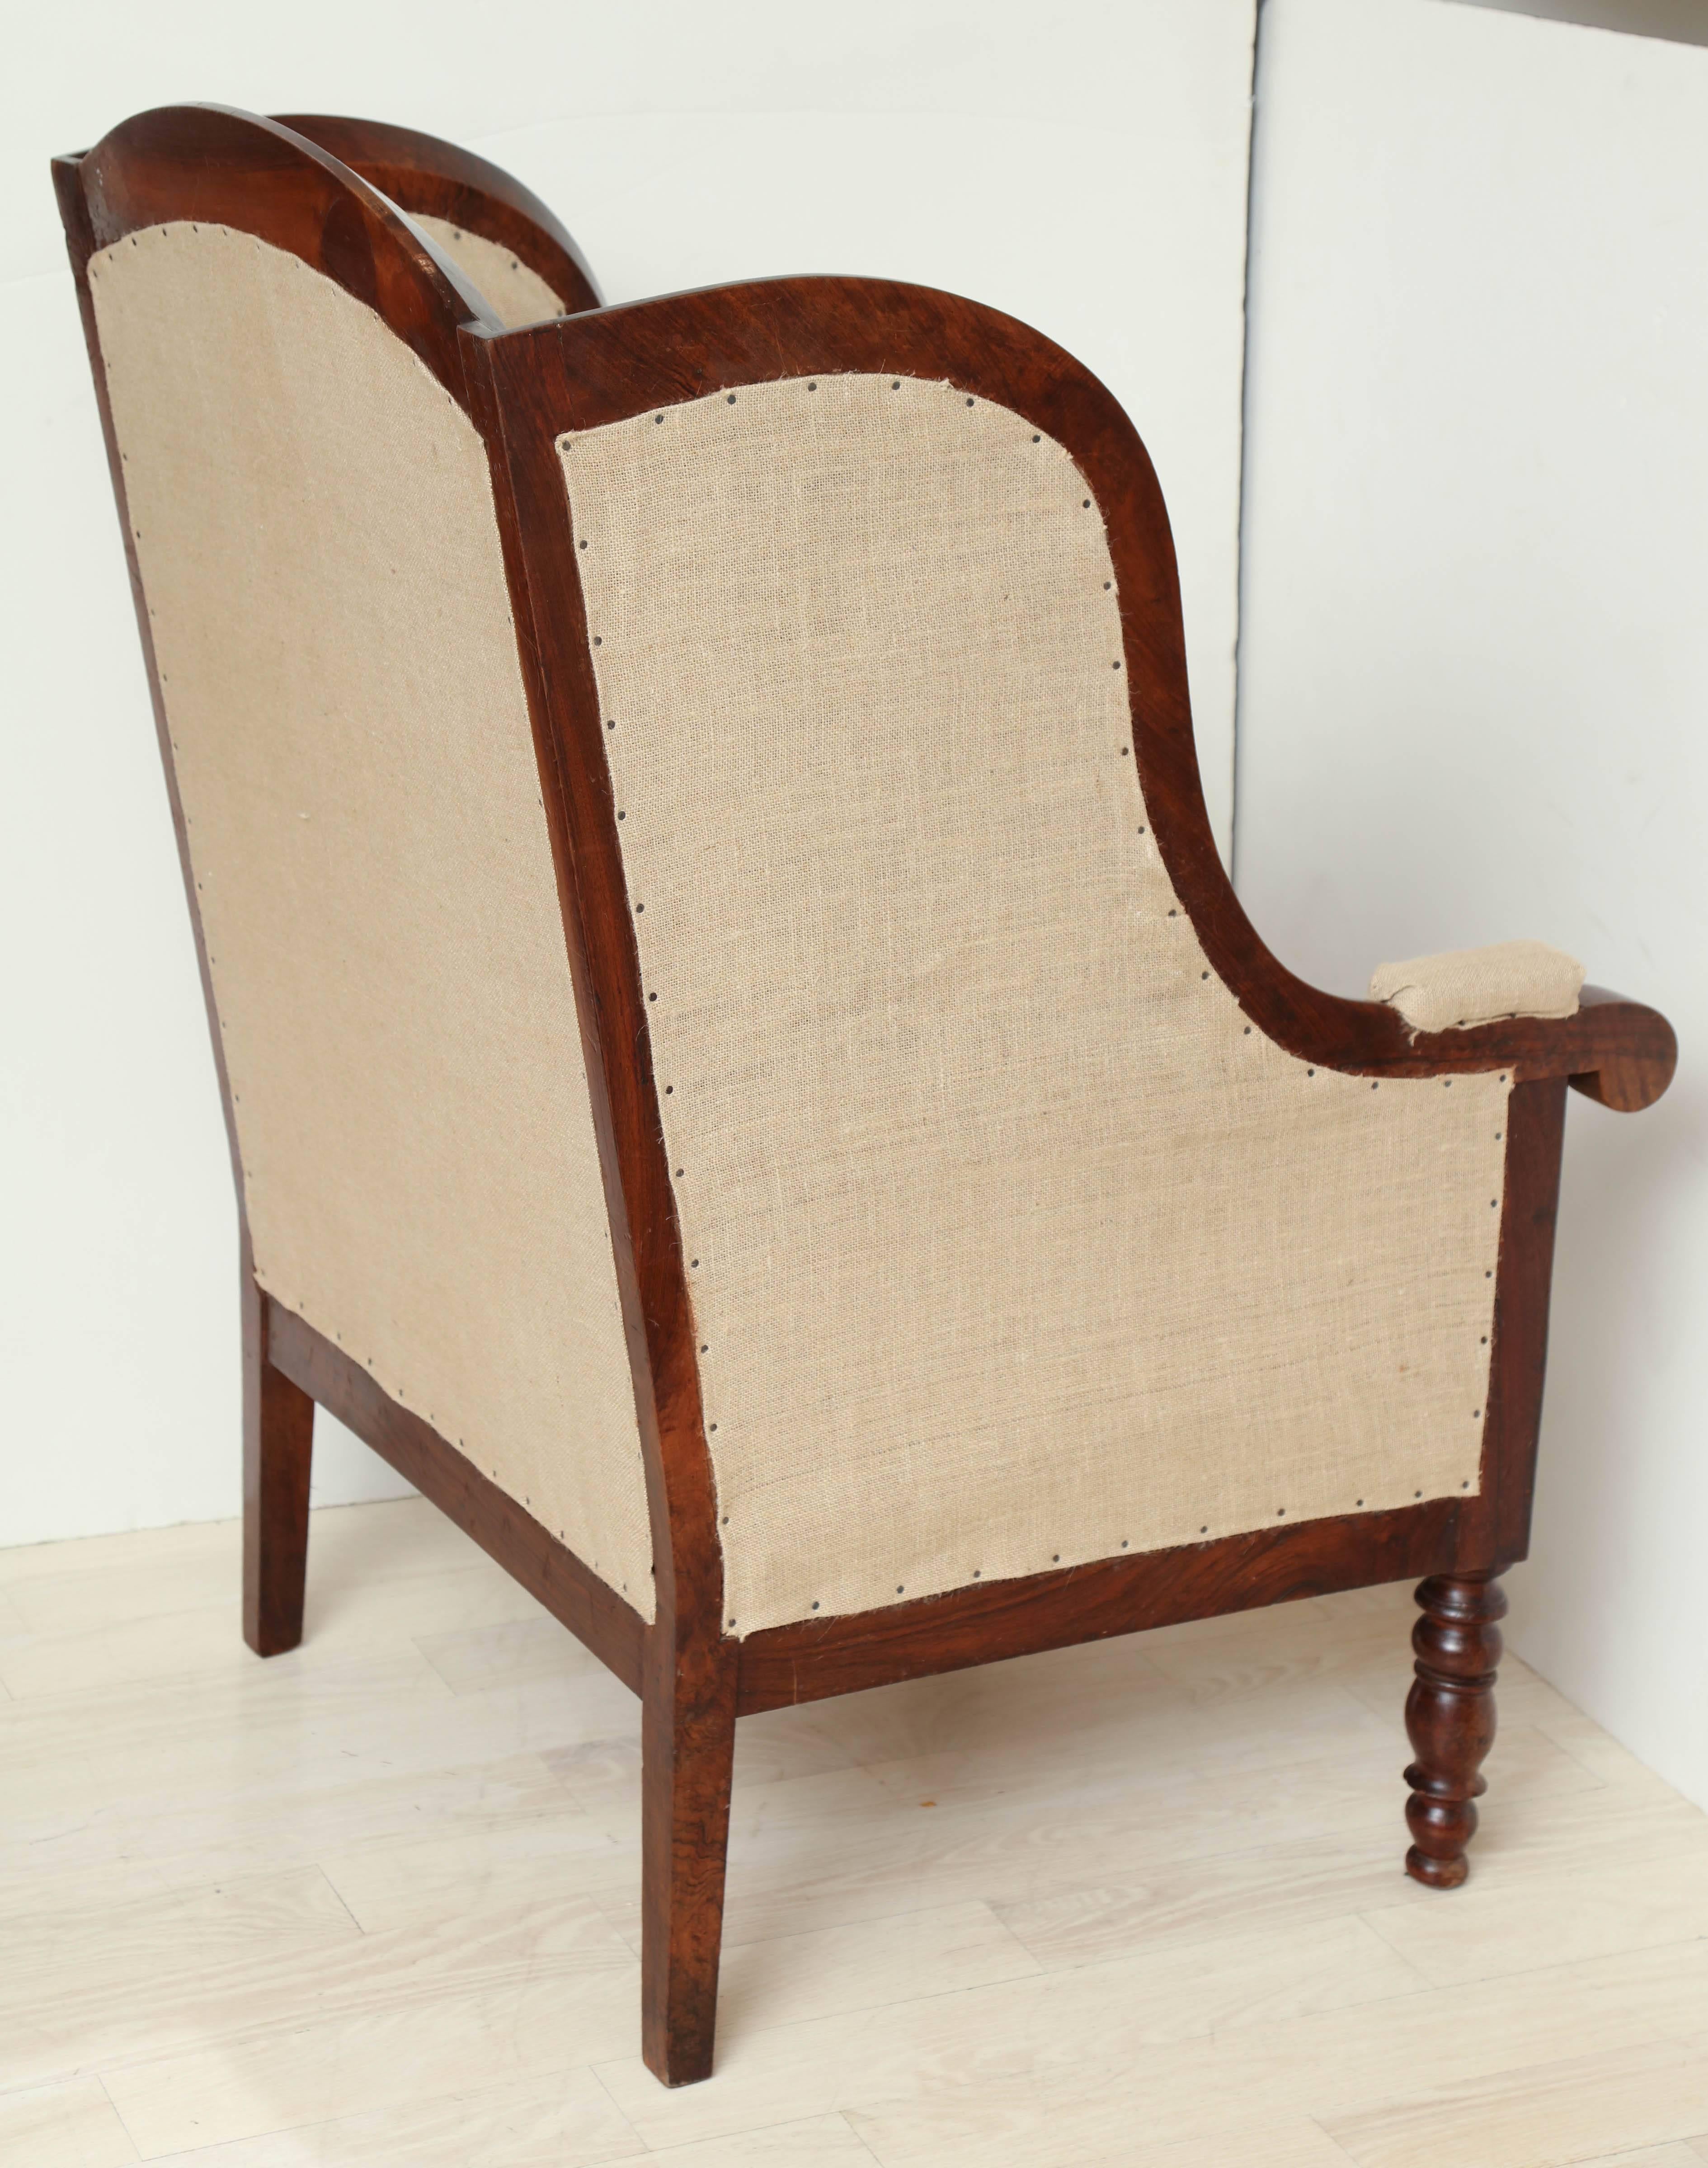 Early 19th Century French Walnut Upholstered Wing Chair For Sale 4